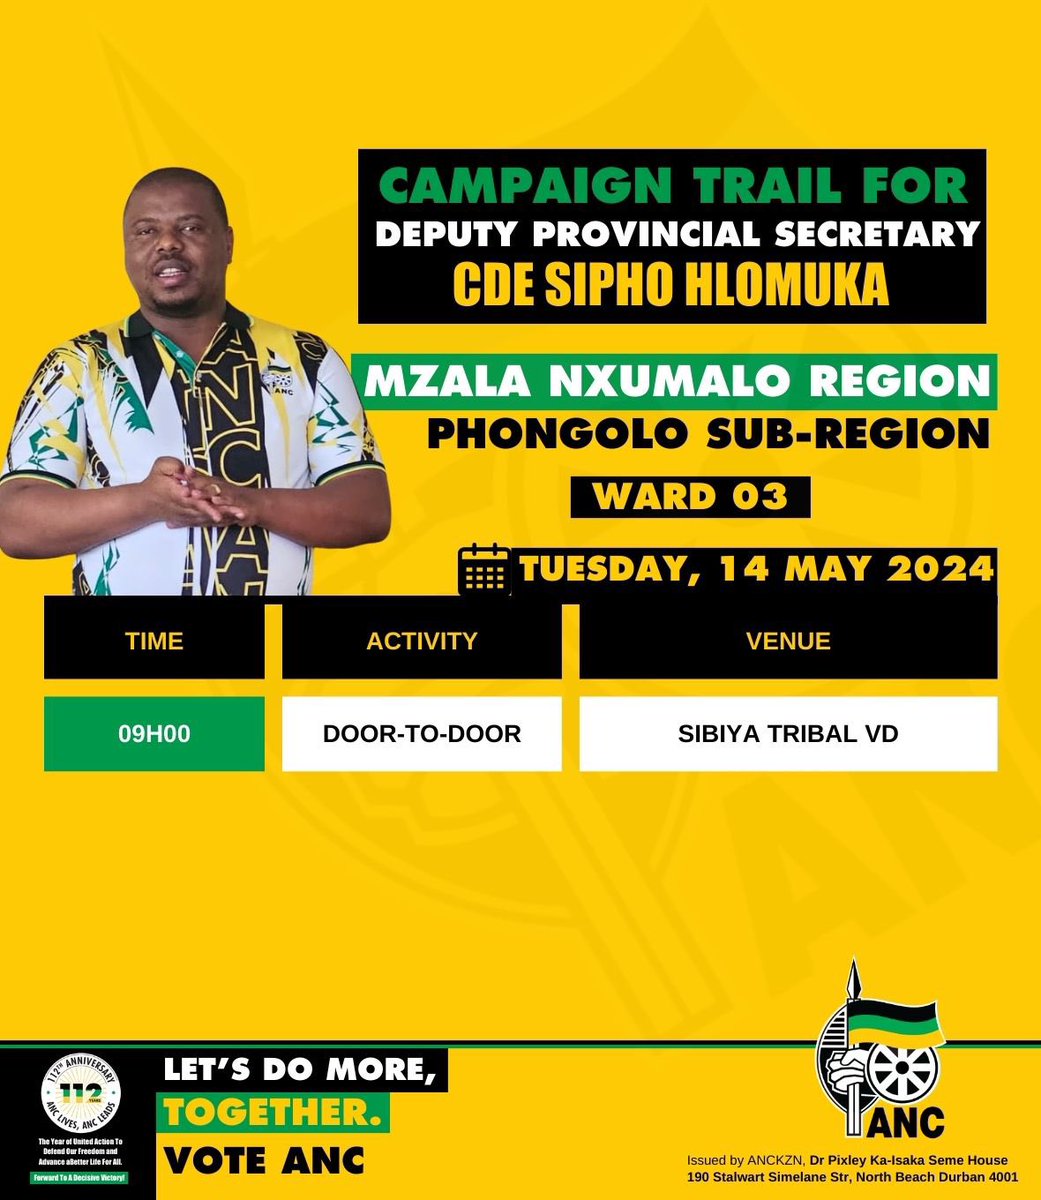 Comrade Sipho Hlomuka, affectionately known as Inyoni yoThukala, is once again on the front lines campaigning for the ANC as we approach the National and Provincial elections. This time, his vigorous campaign efforts are centered in Mzala Nxumalo, where he aims to galvanize…